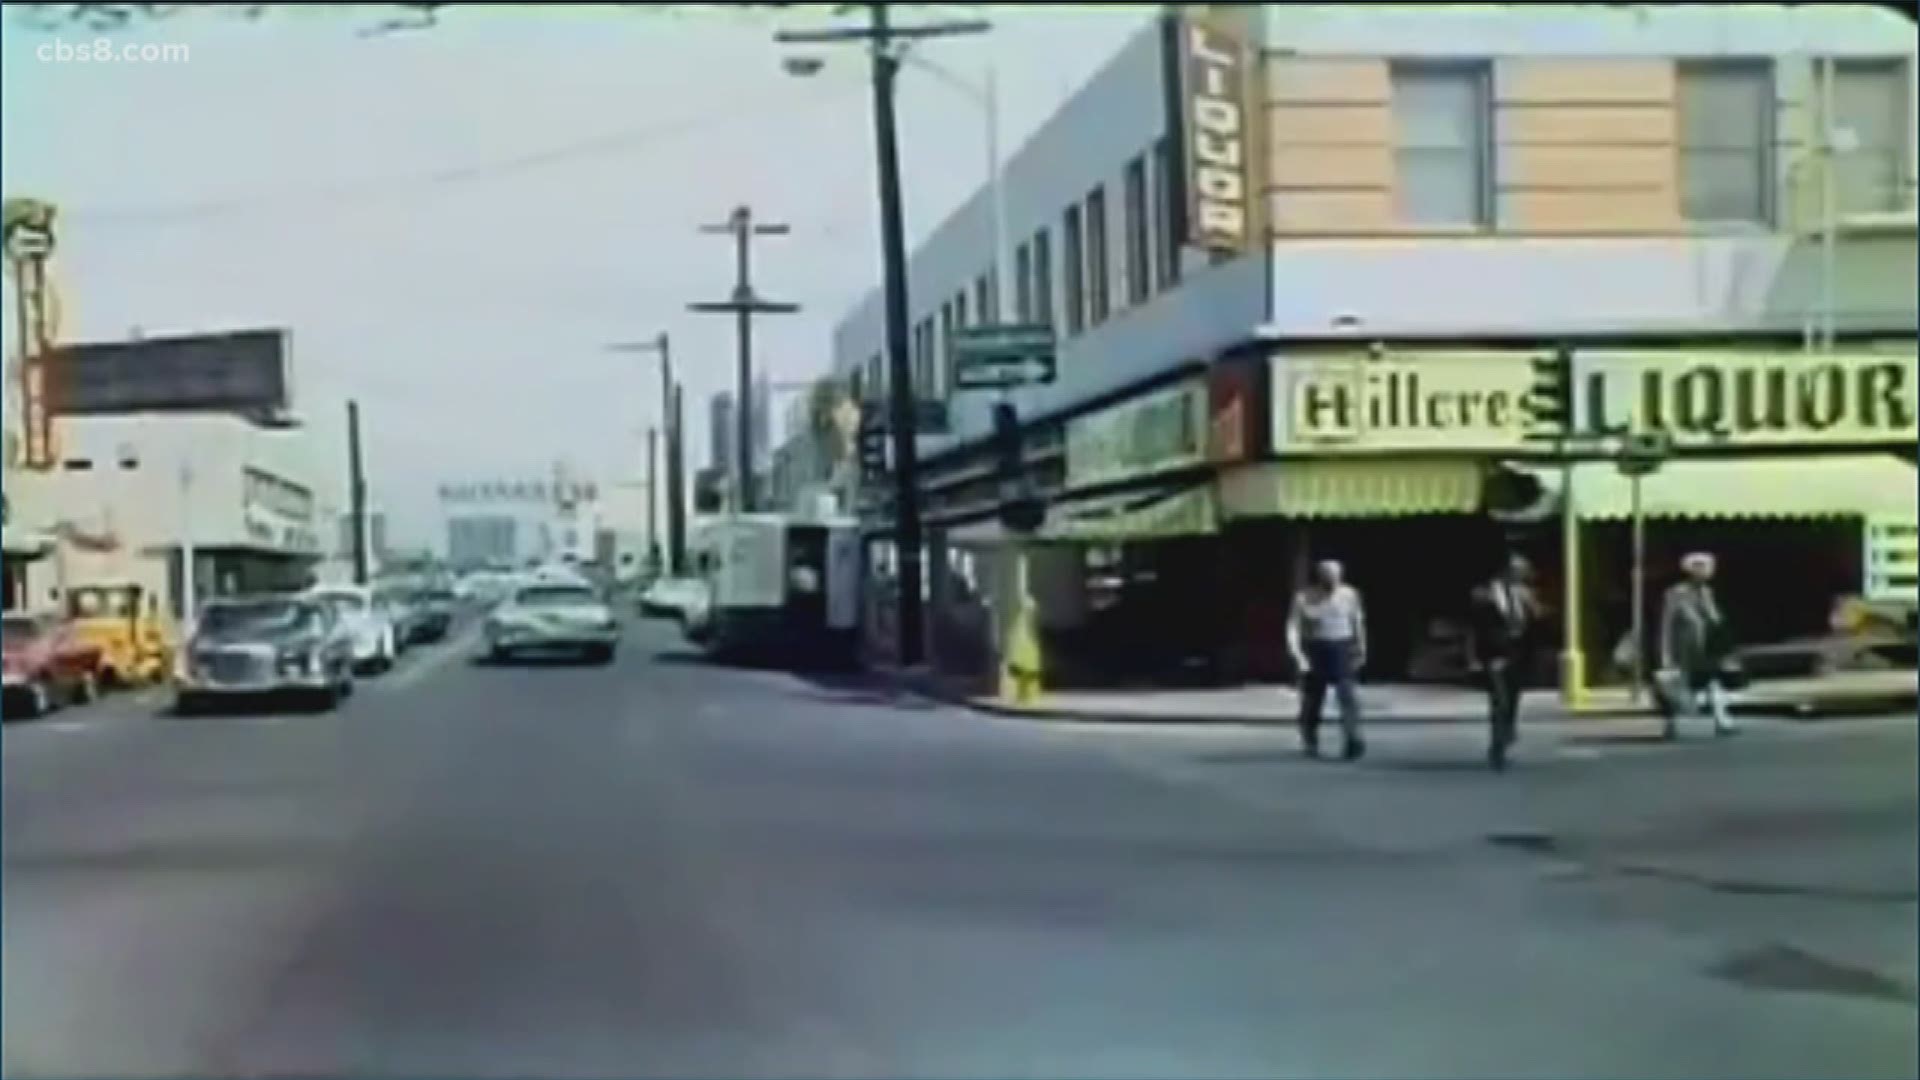 Take a trip back to see how much in this San Diego neighborhood has changed – and what has remained the same – over four decades later.